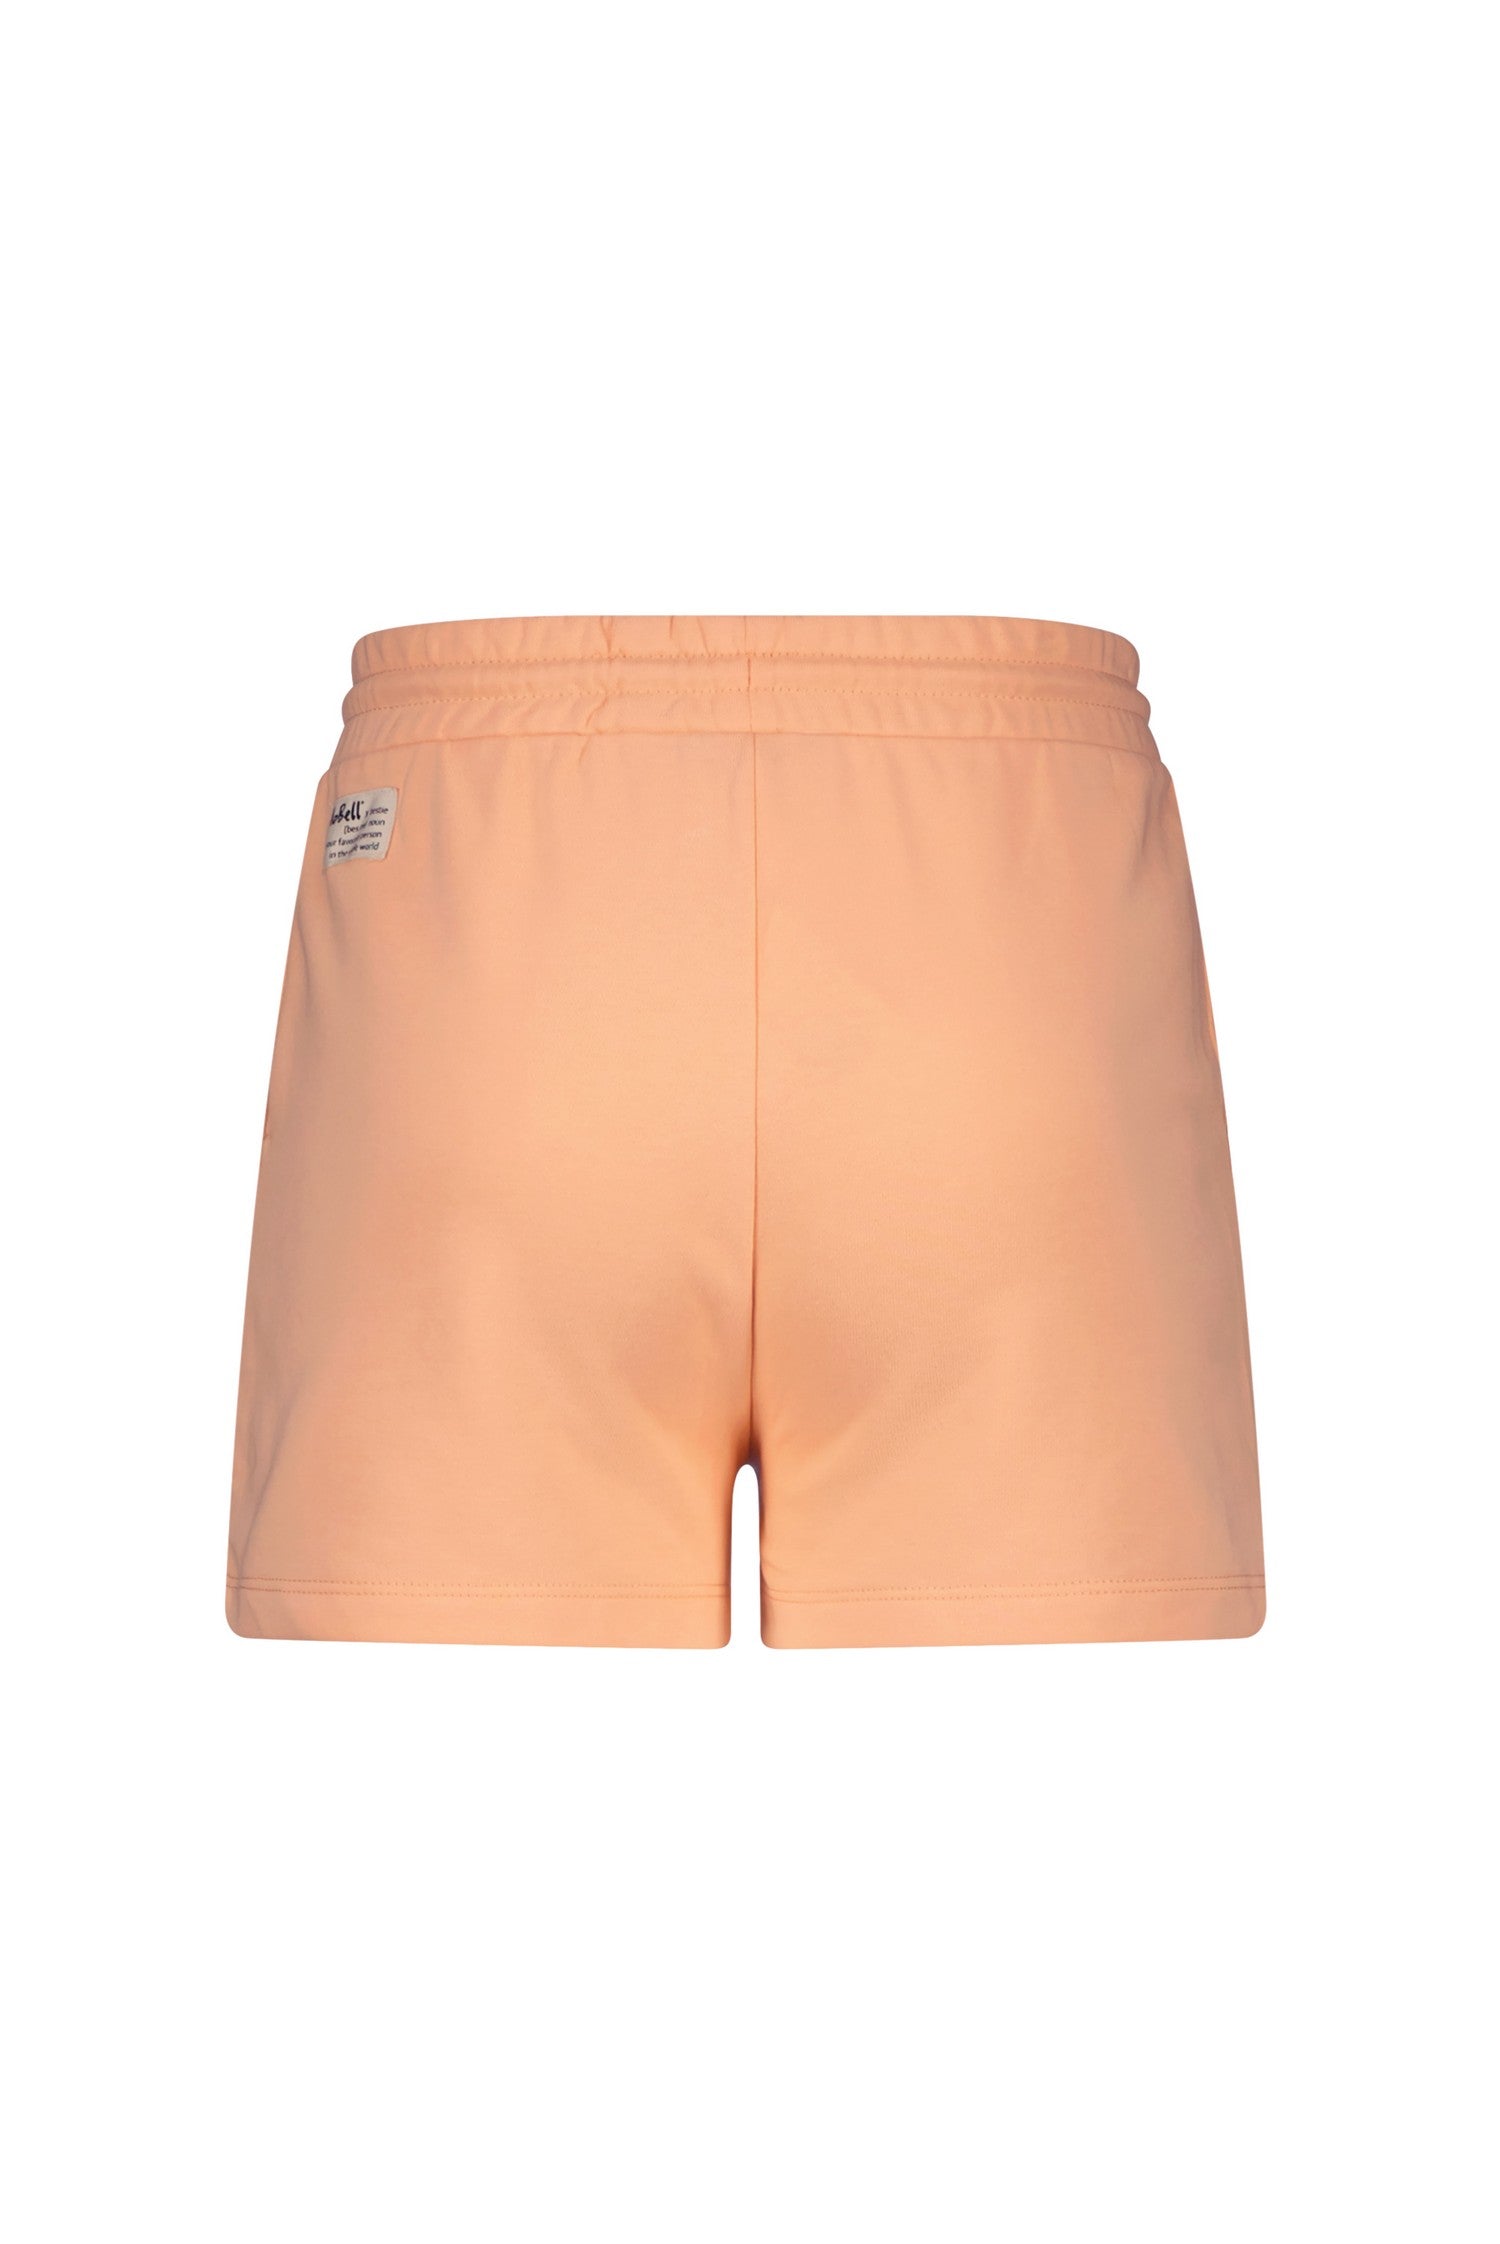 NoBell Siza D solid sweat short